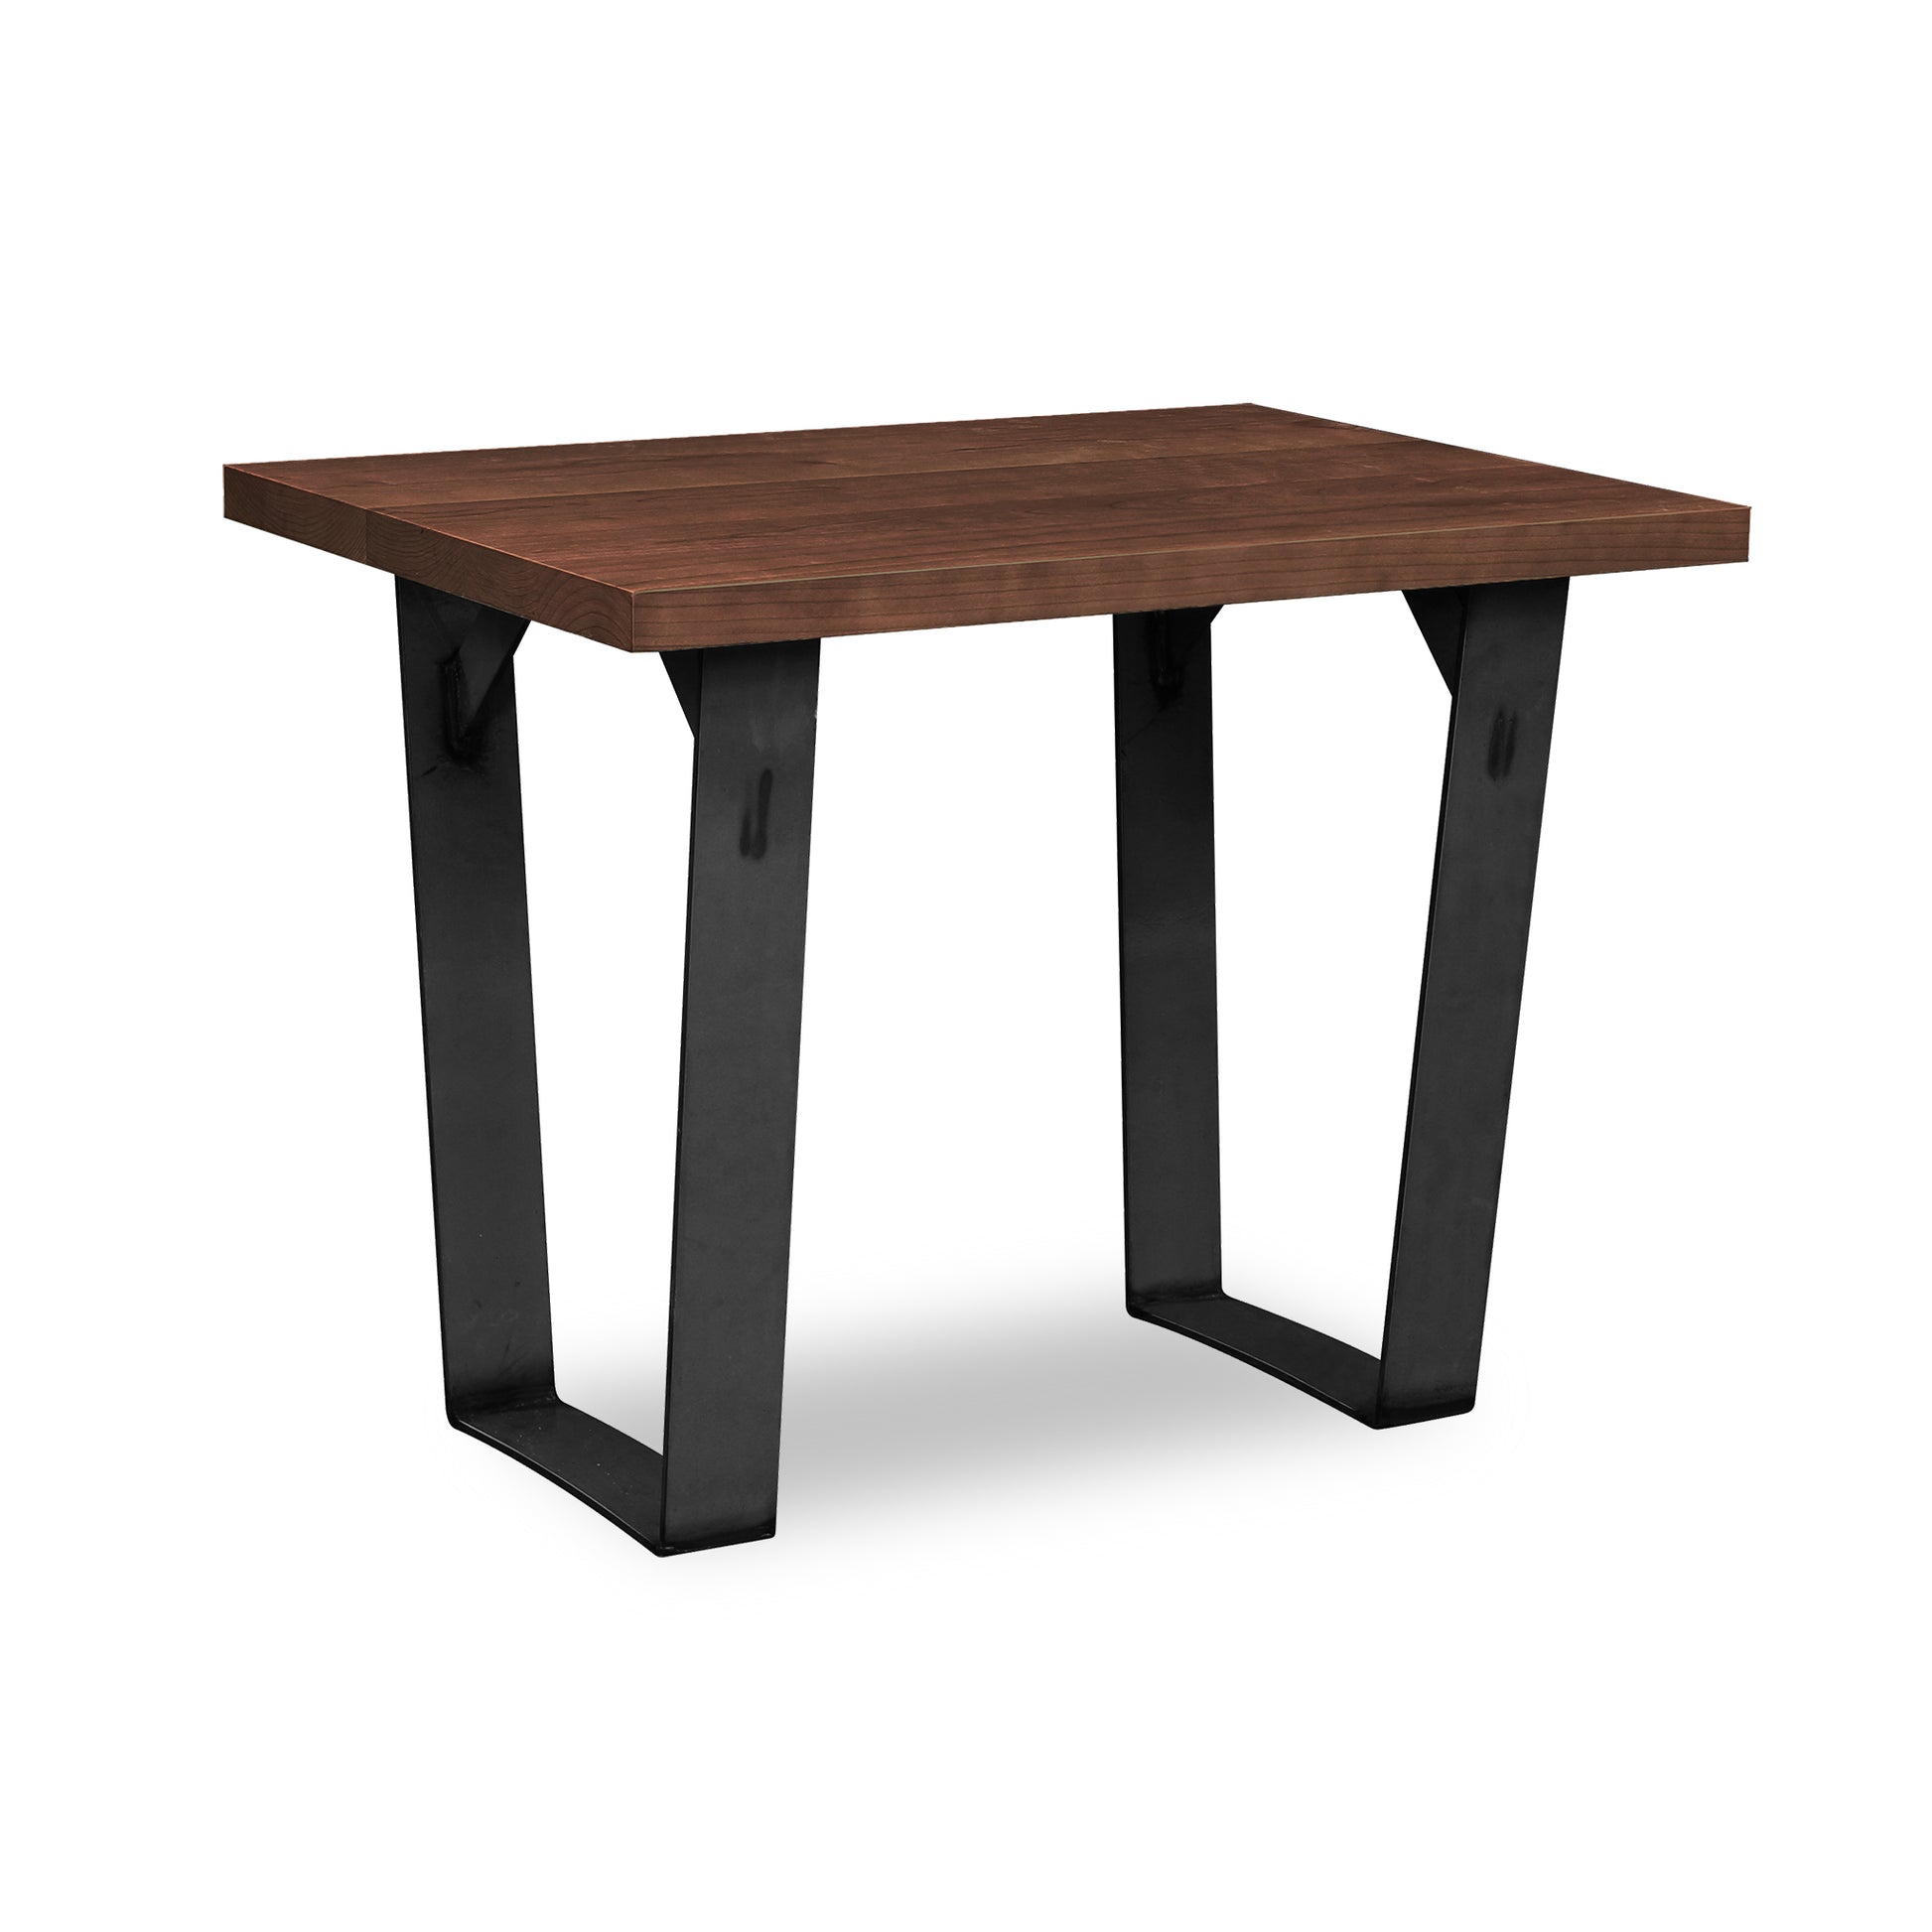 A custom-made Metropolitan End Table by Lyndon Furniture with a wooden top and black legs.